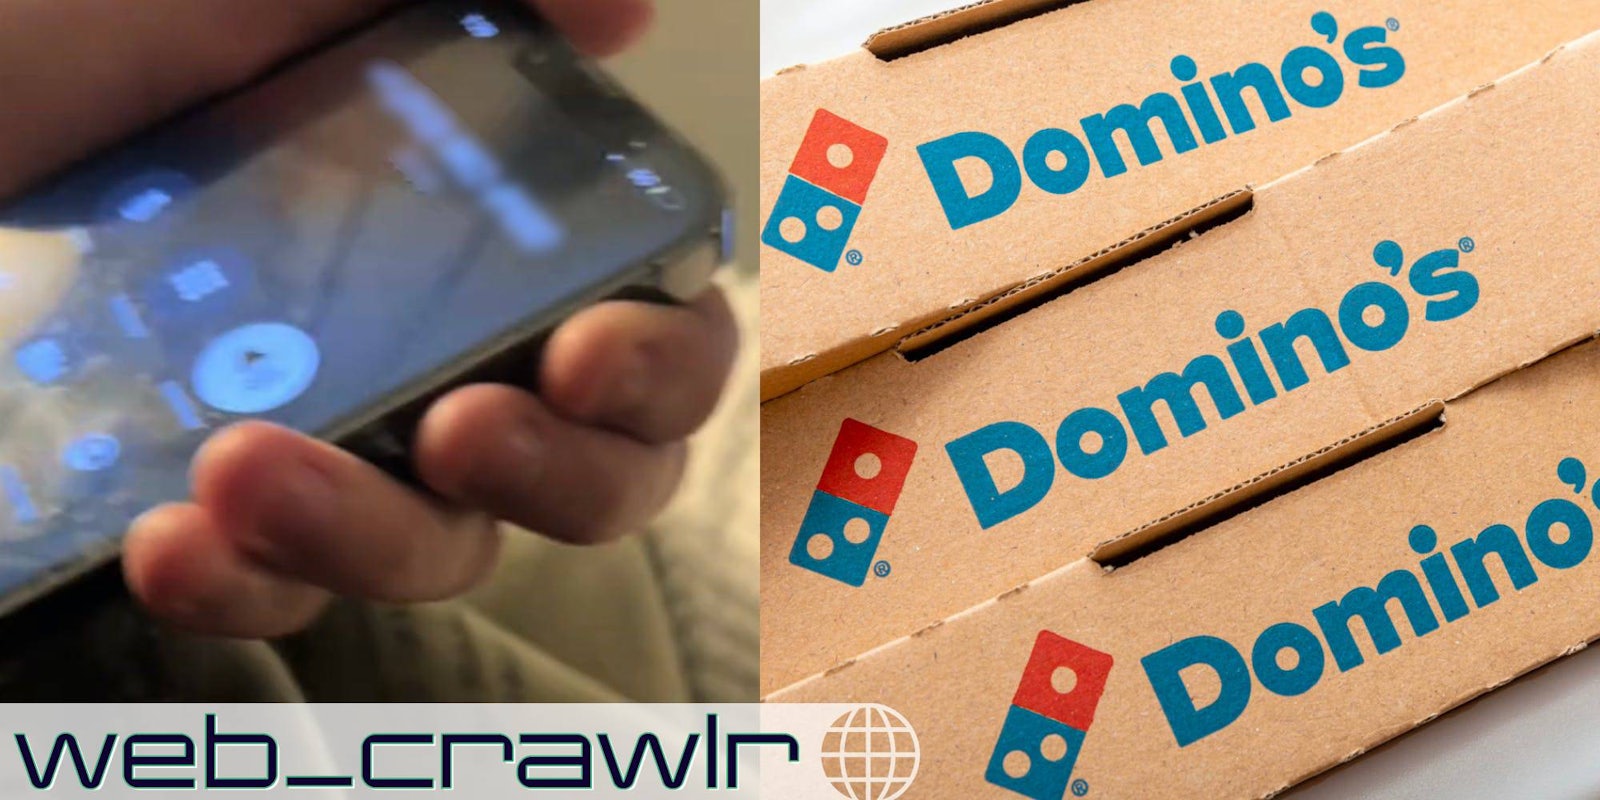 (l) Hand holding phone (r) Domino's boxes